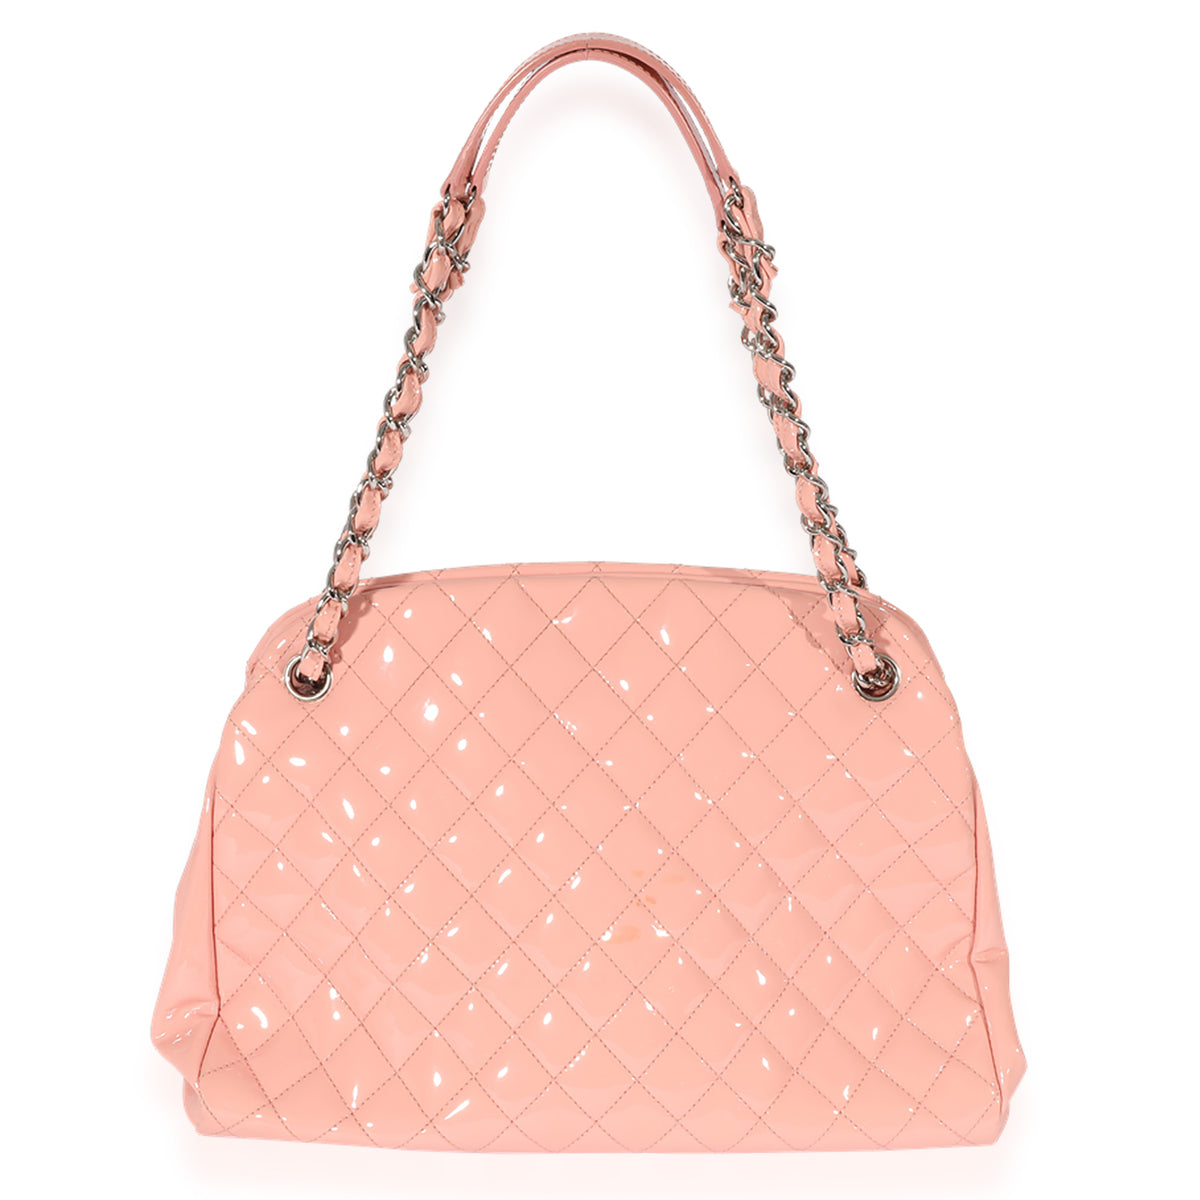 Mademoiselle bowling bag in pink leather